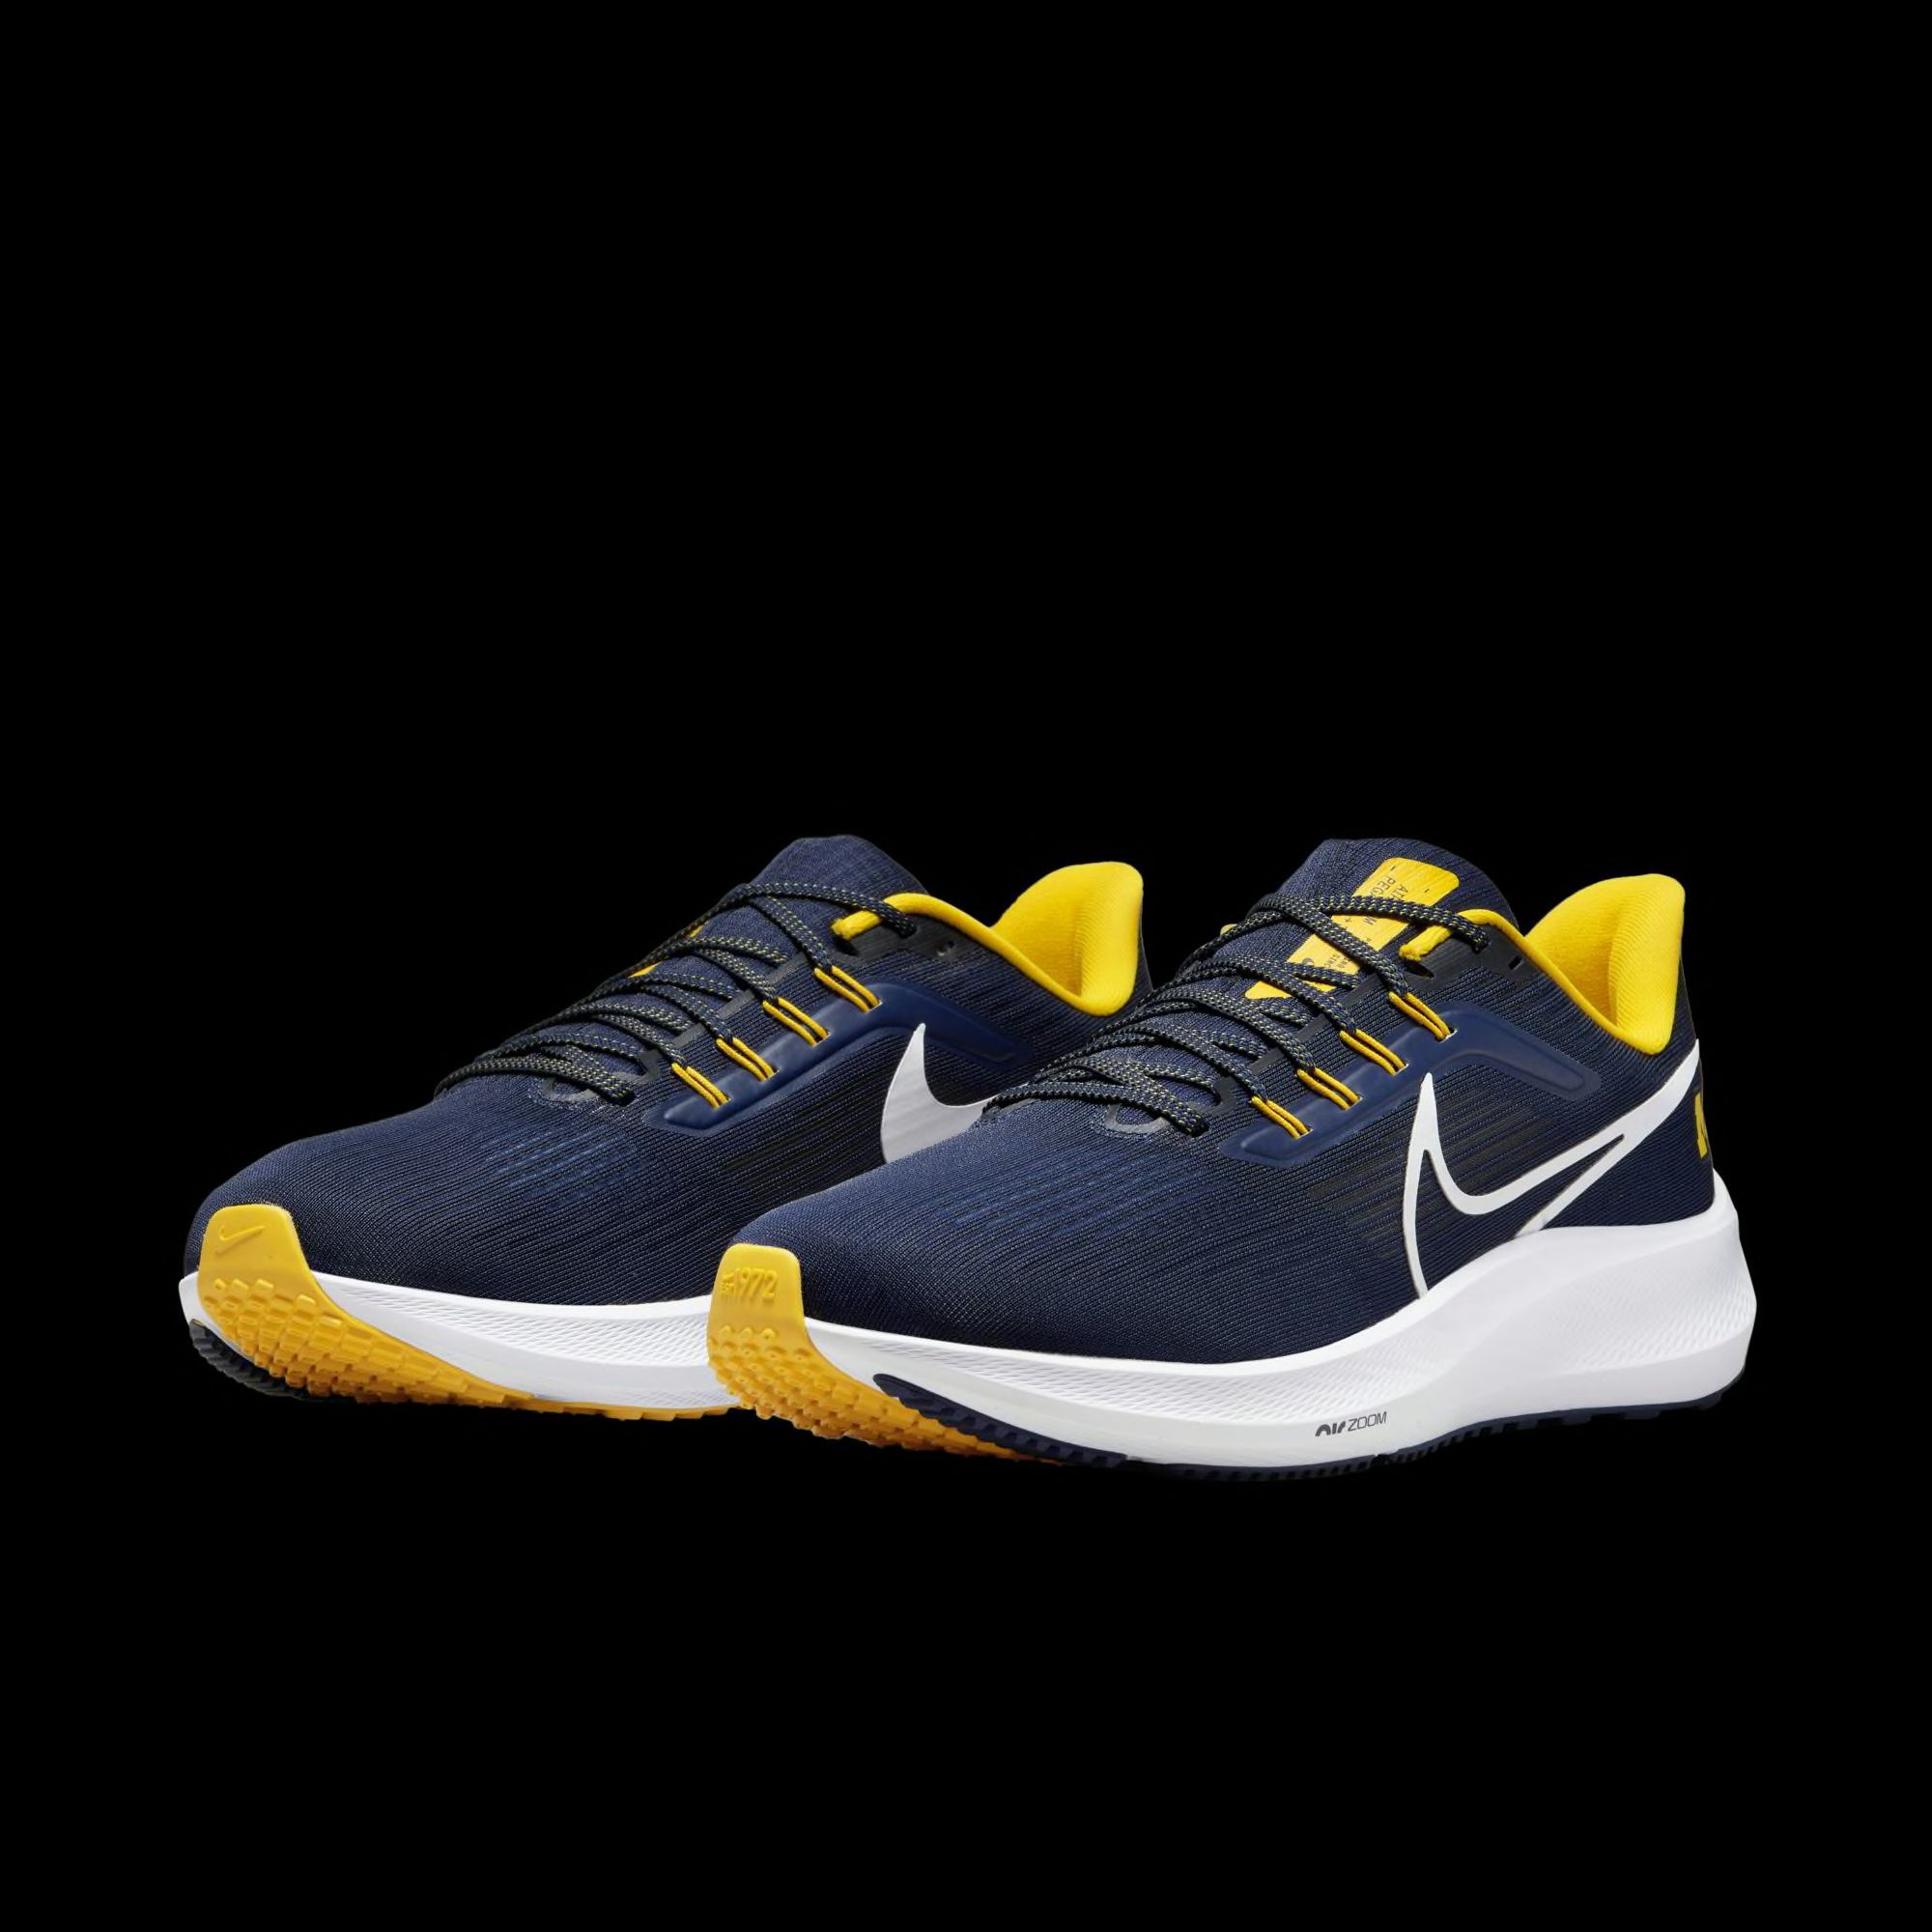 Wolverines You these Michigan shoes by